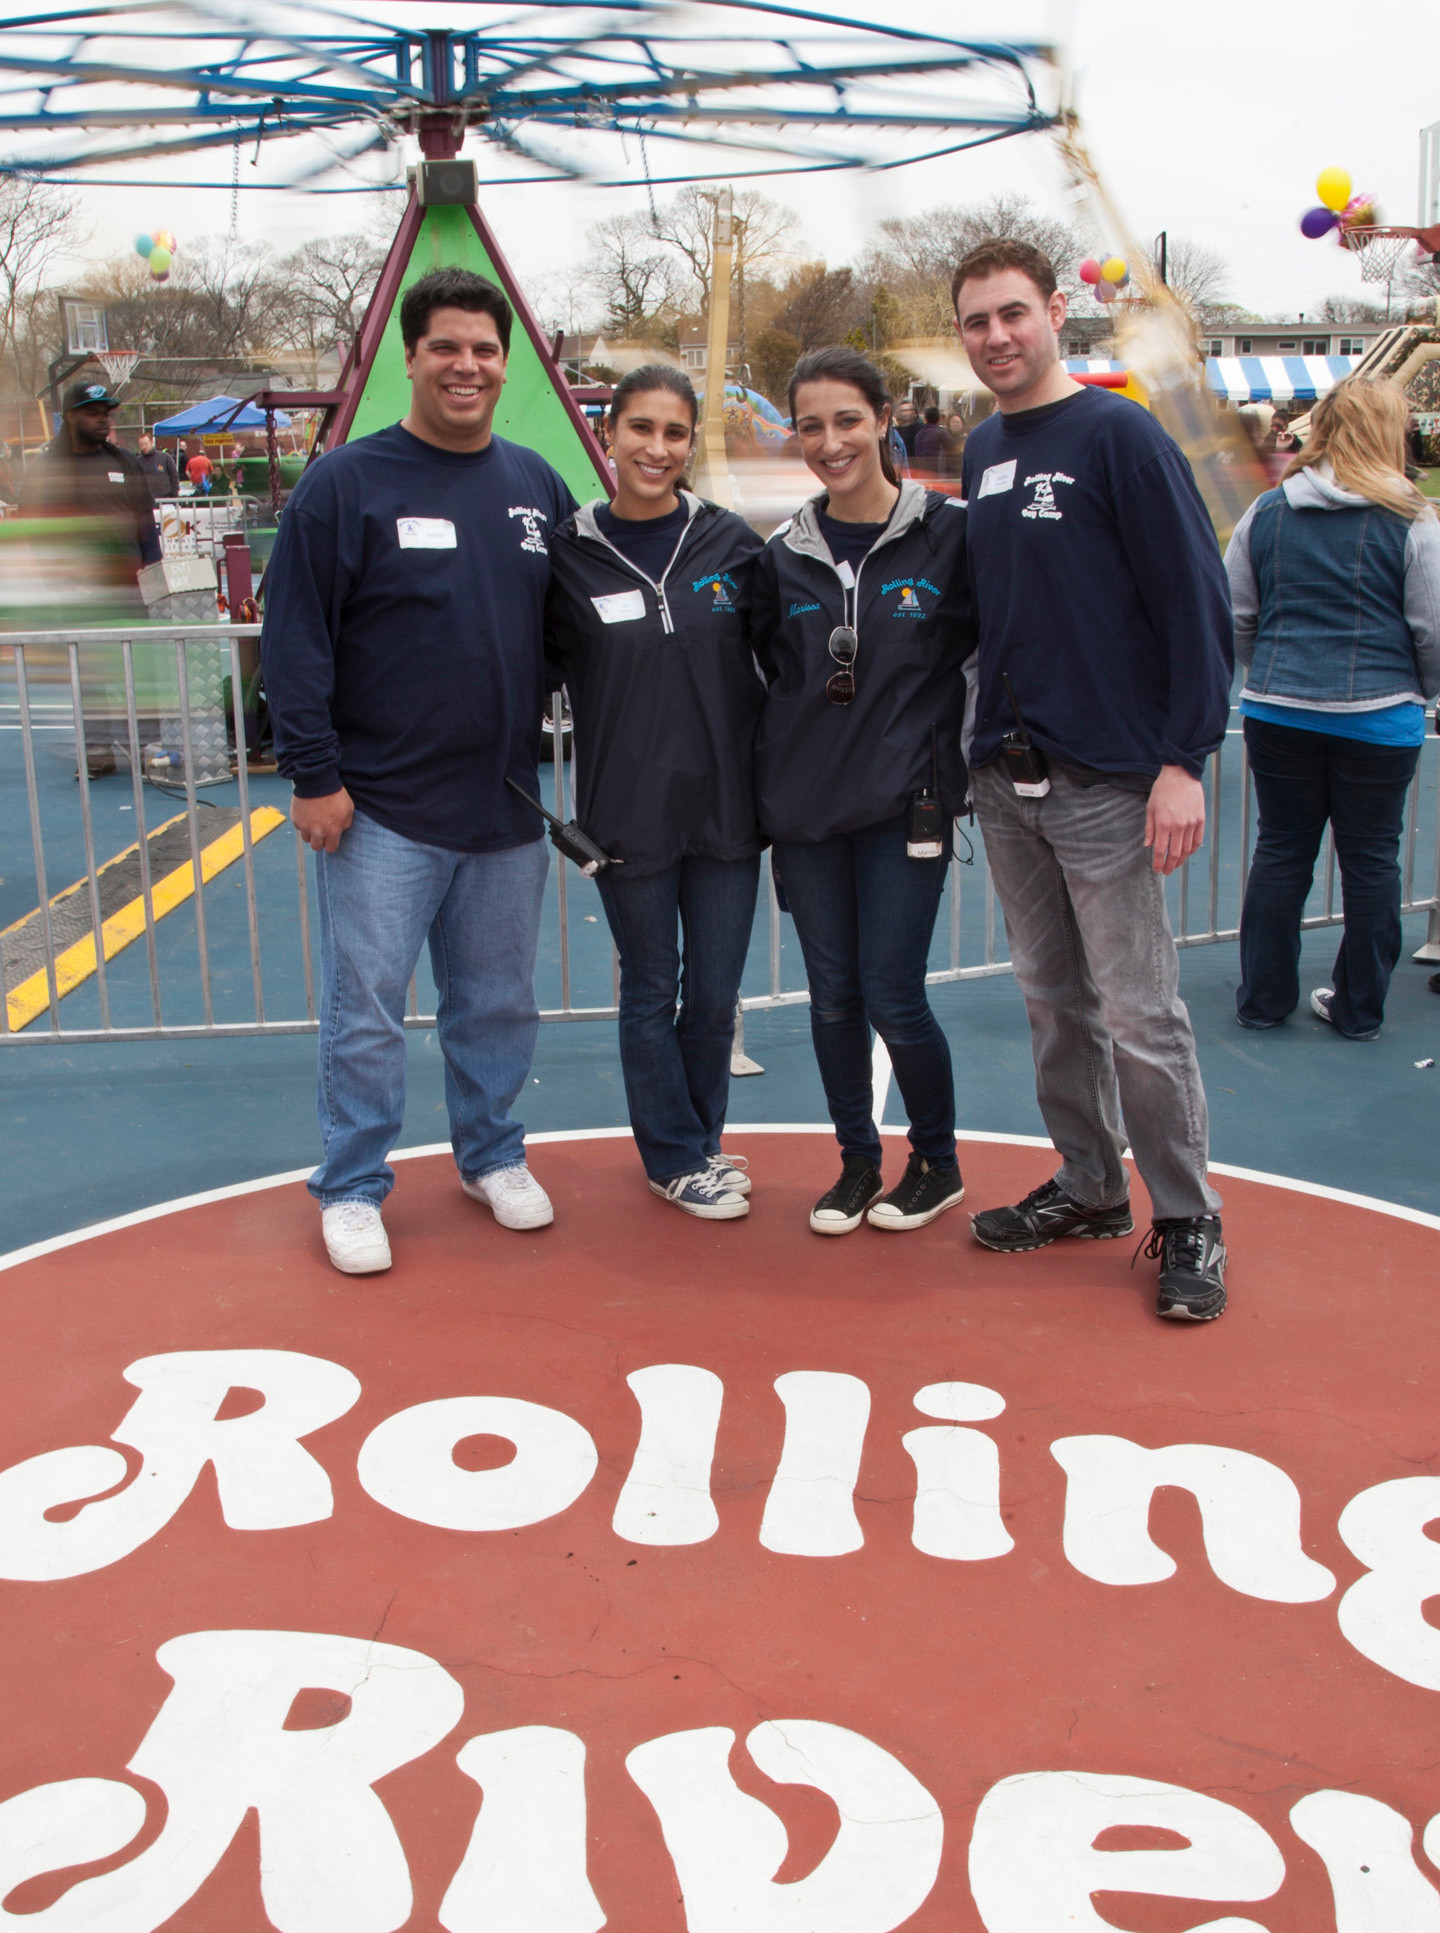 Rolling River staff enjoyed the day. Pictured from left were Anthony Bruno, Ali Goodman, Marisa Allaven and Andrew Liebowitz.